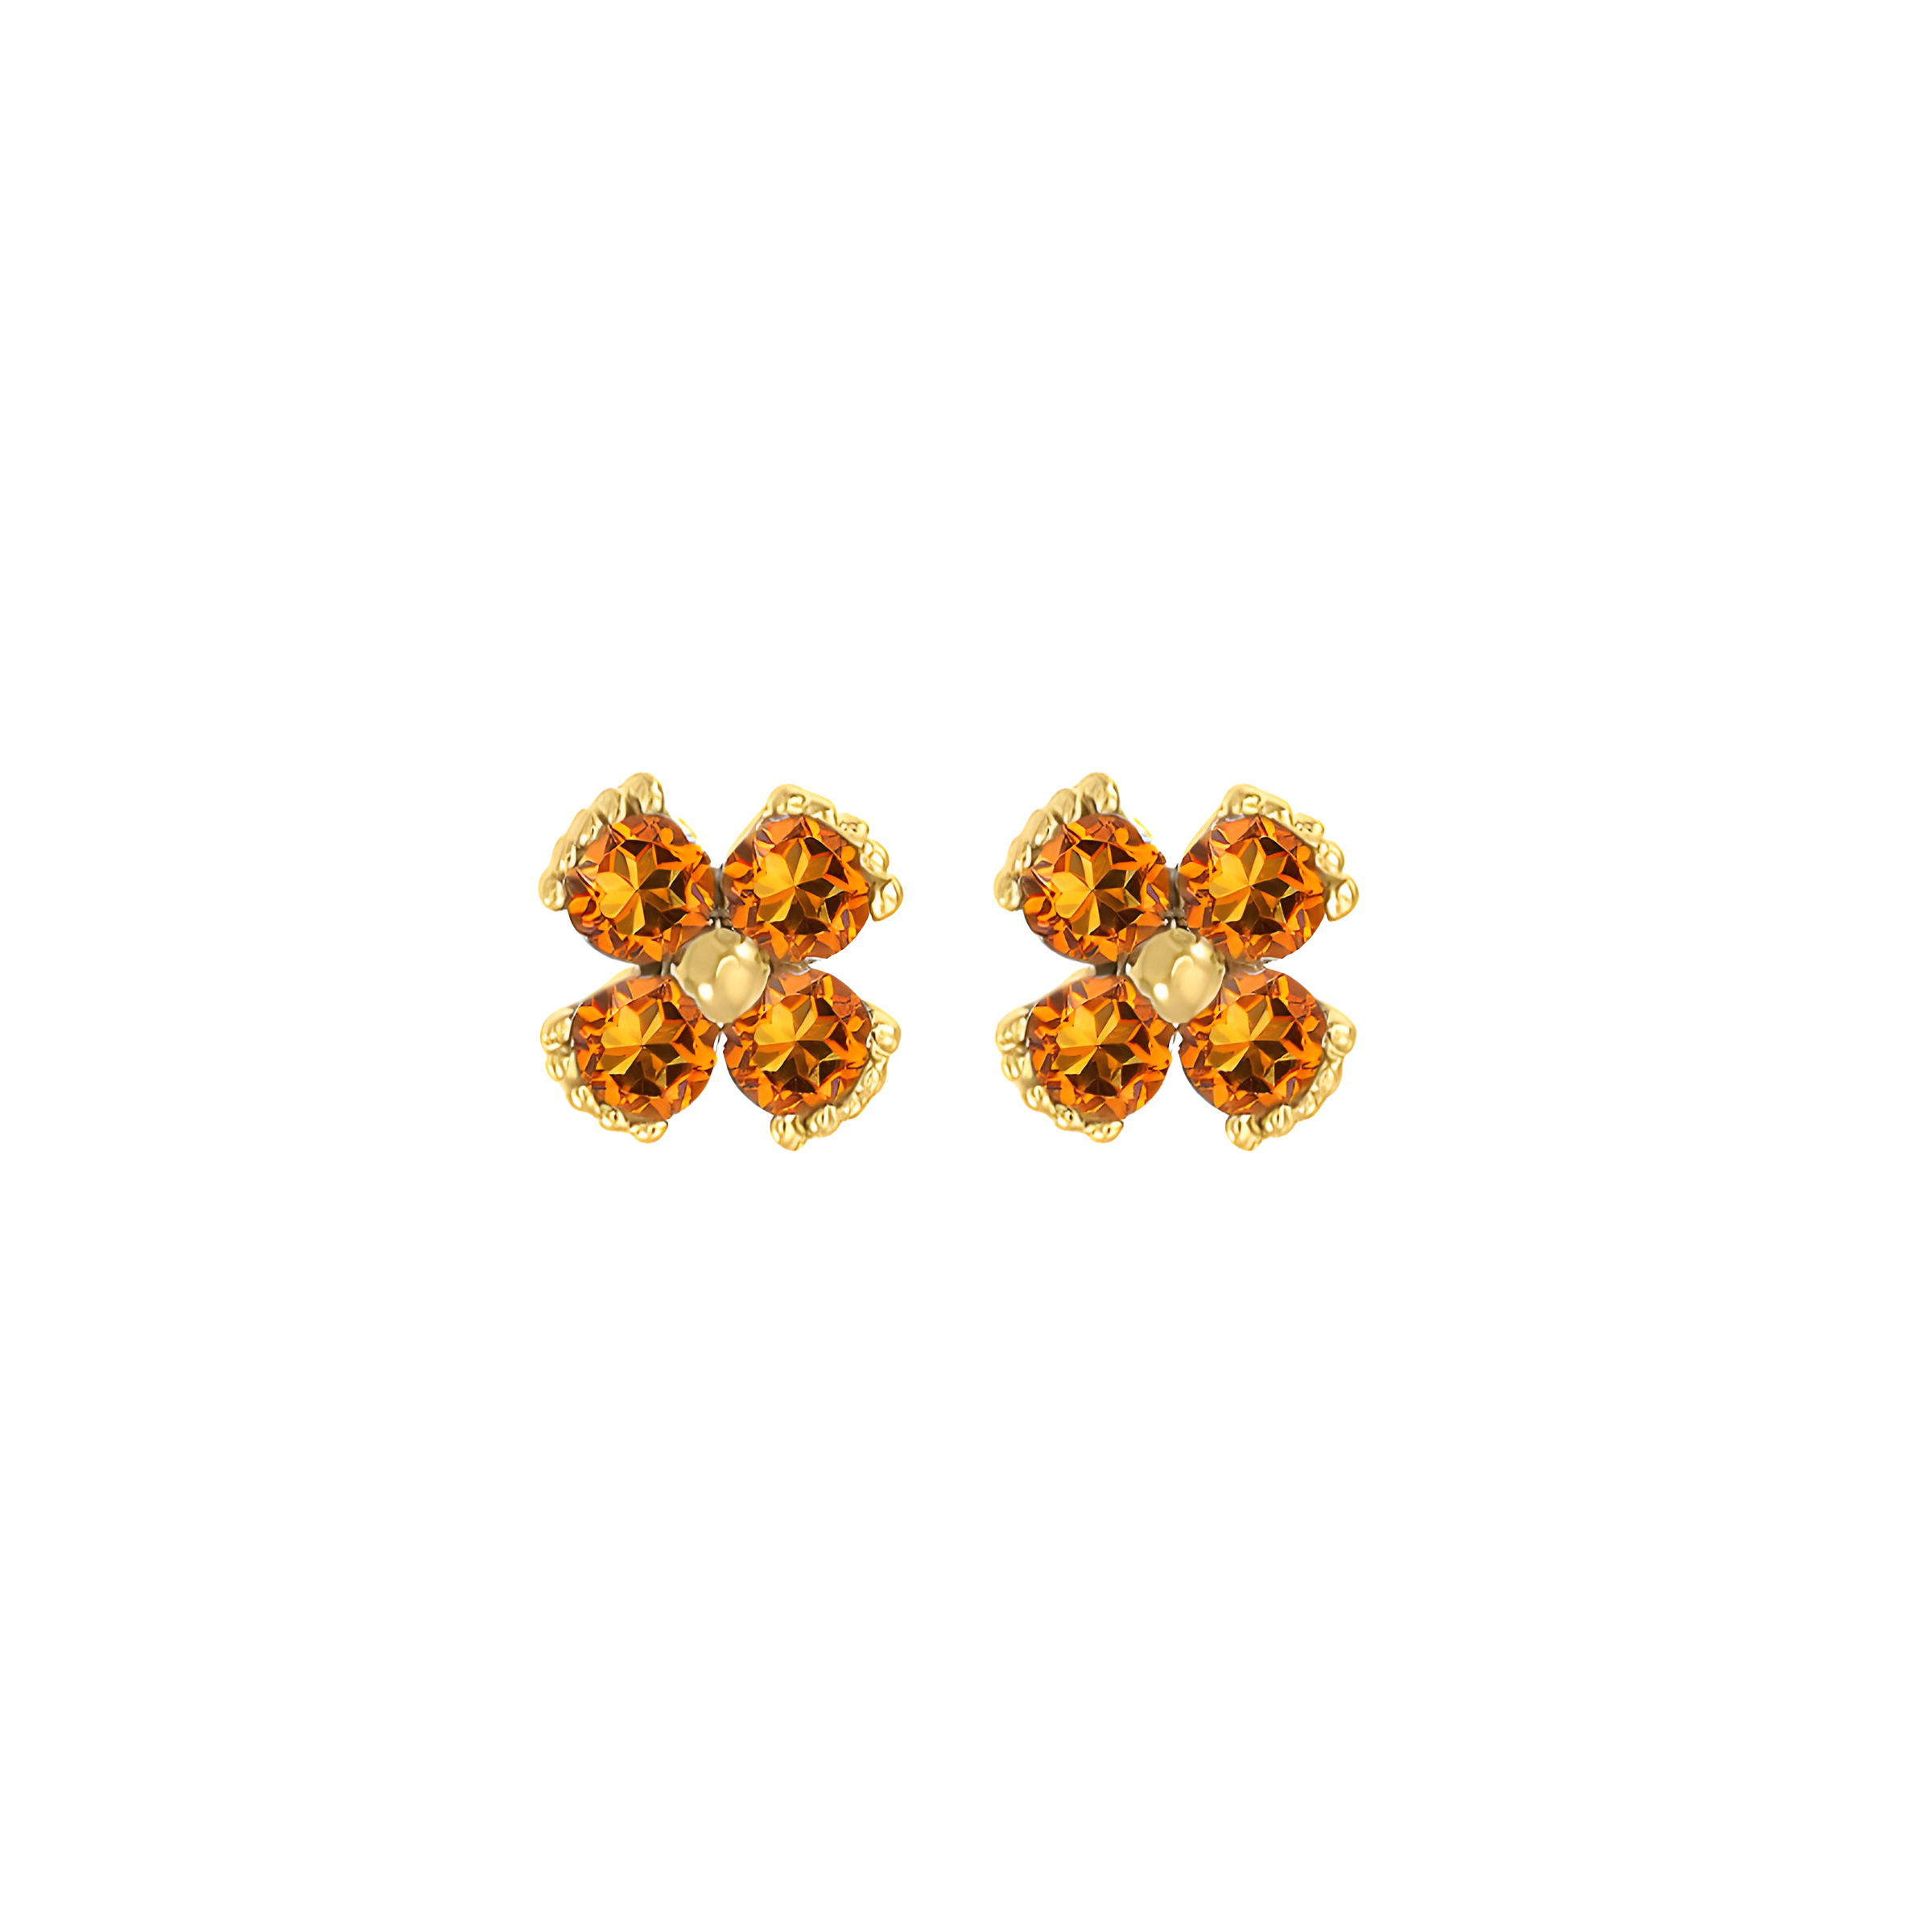 Dainty Floral Citrine Stud Earrings in 18K Yellow Gold